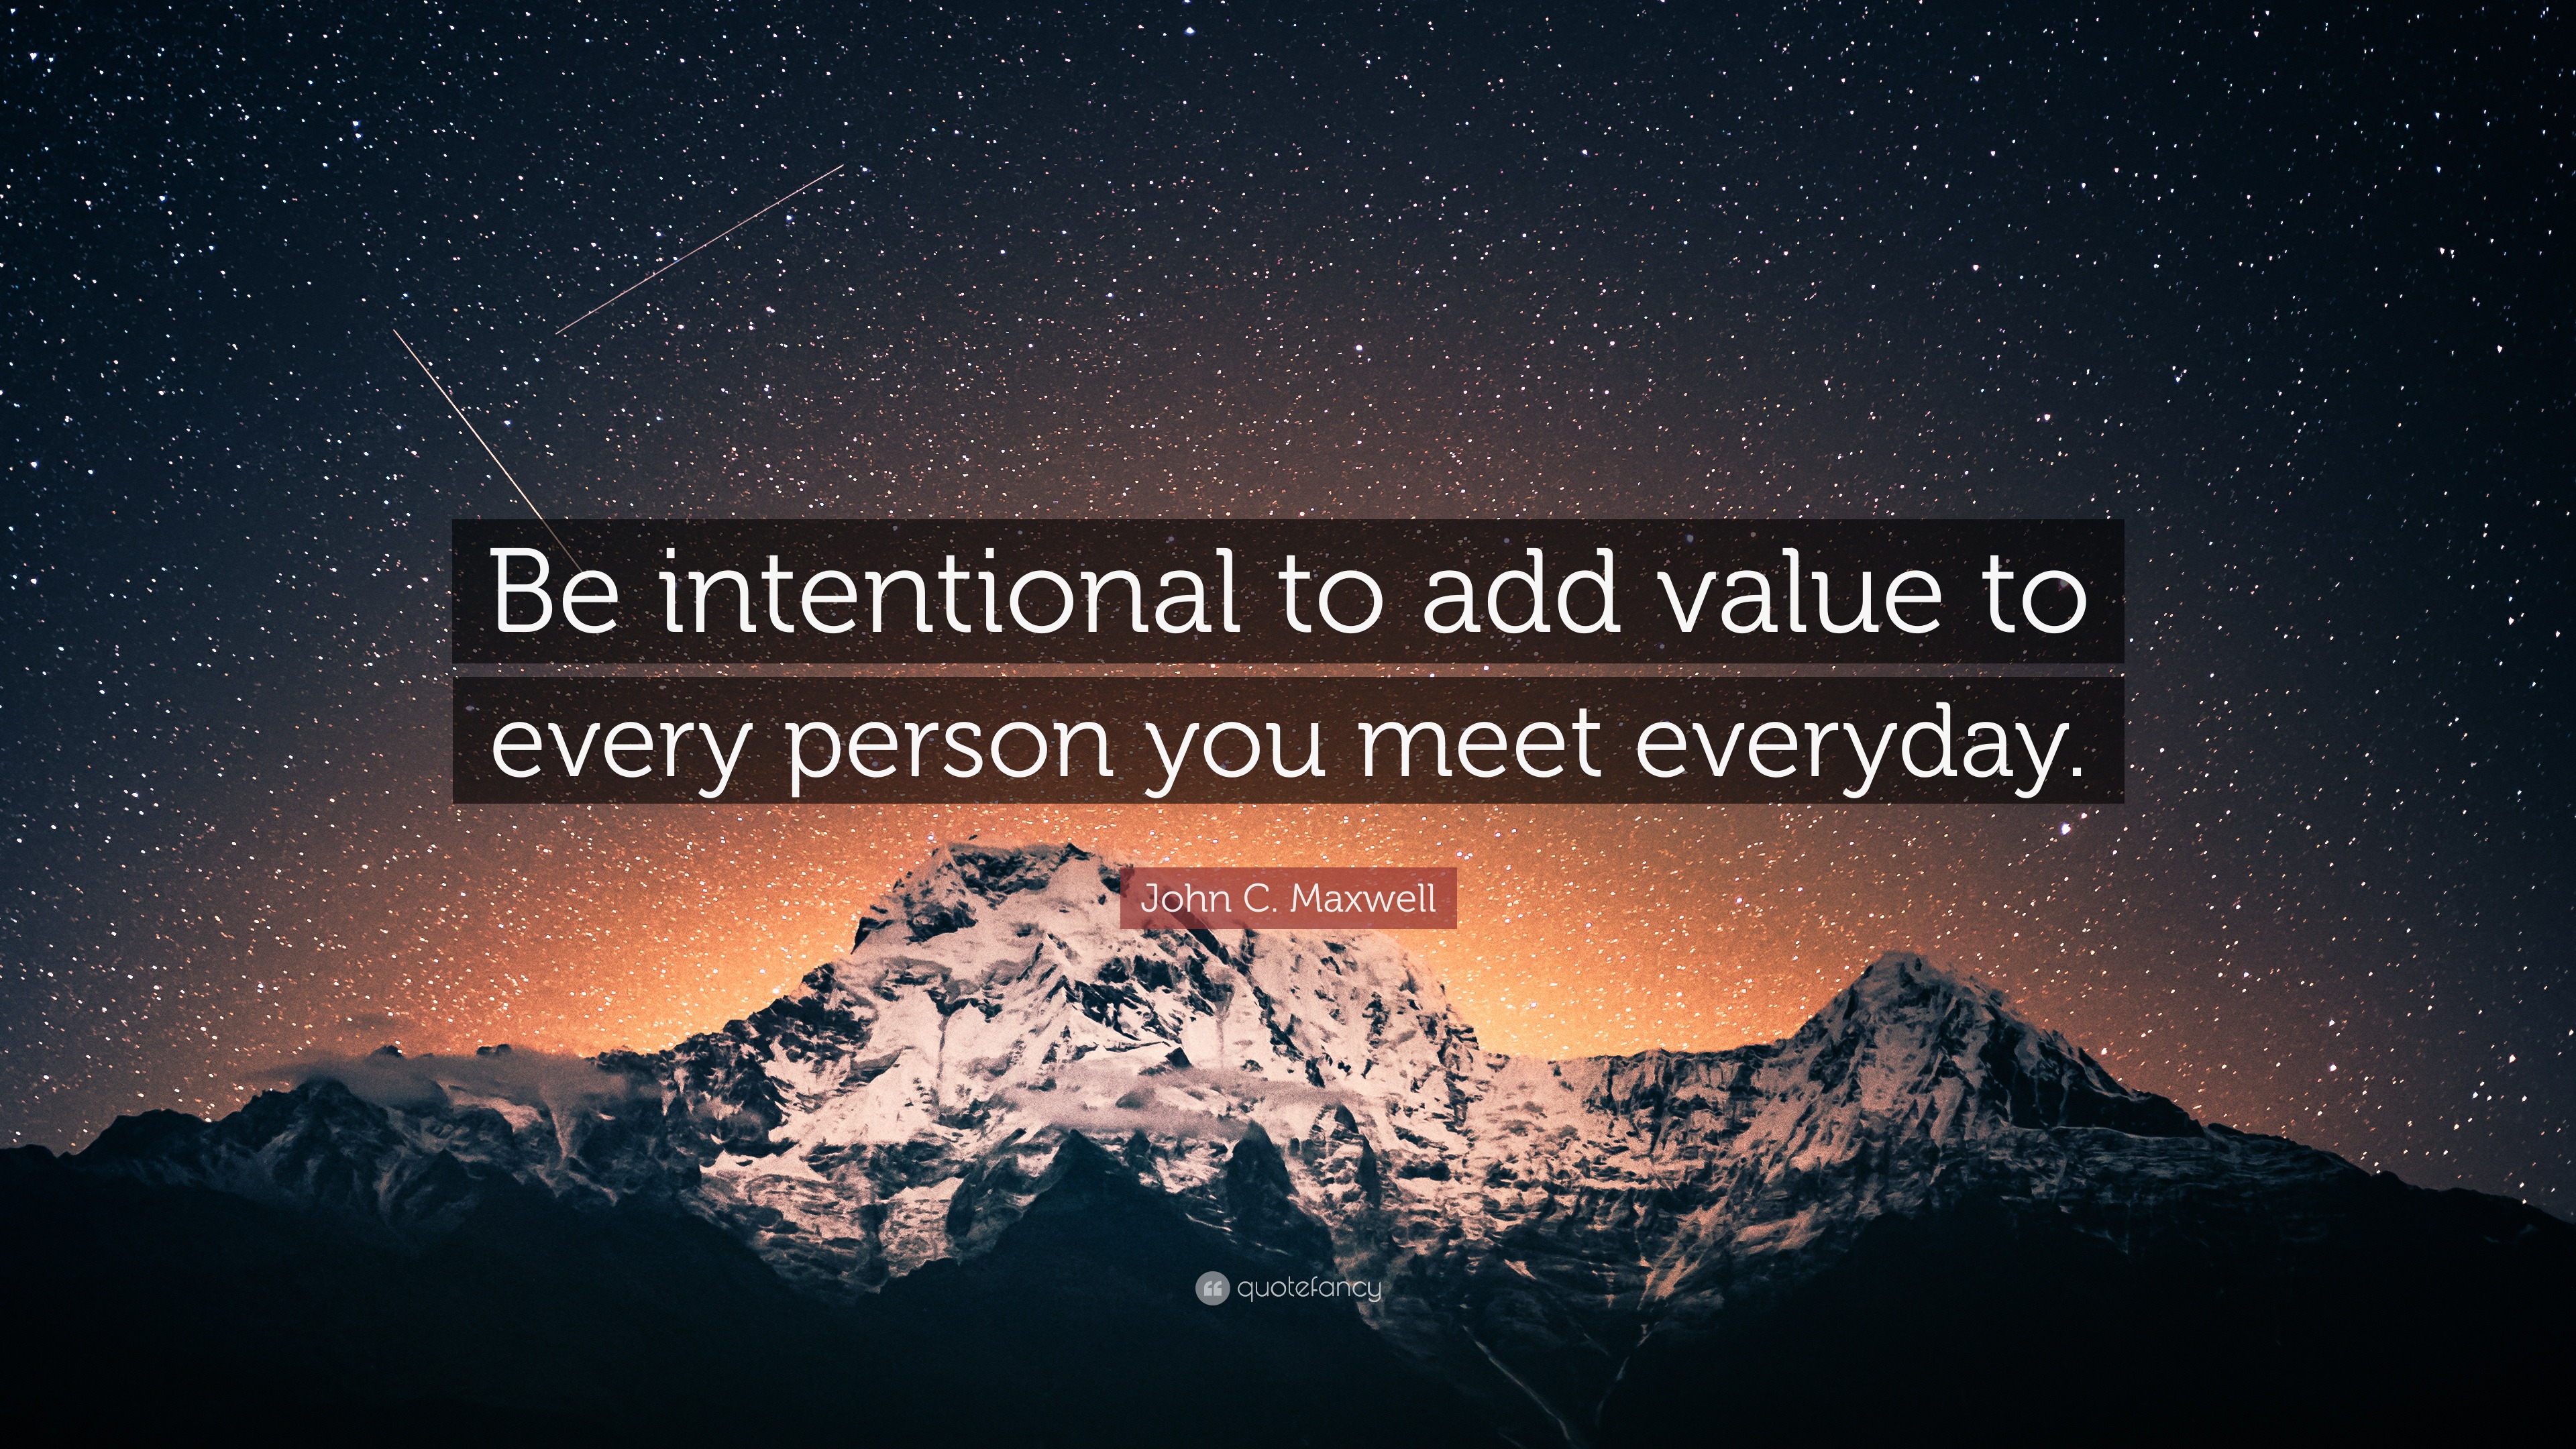 John C. Maxwell Quote: “Be intentional to add value to every person you